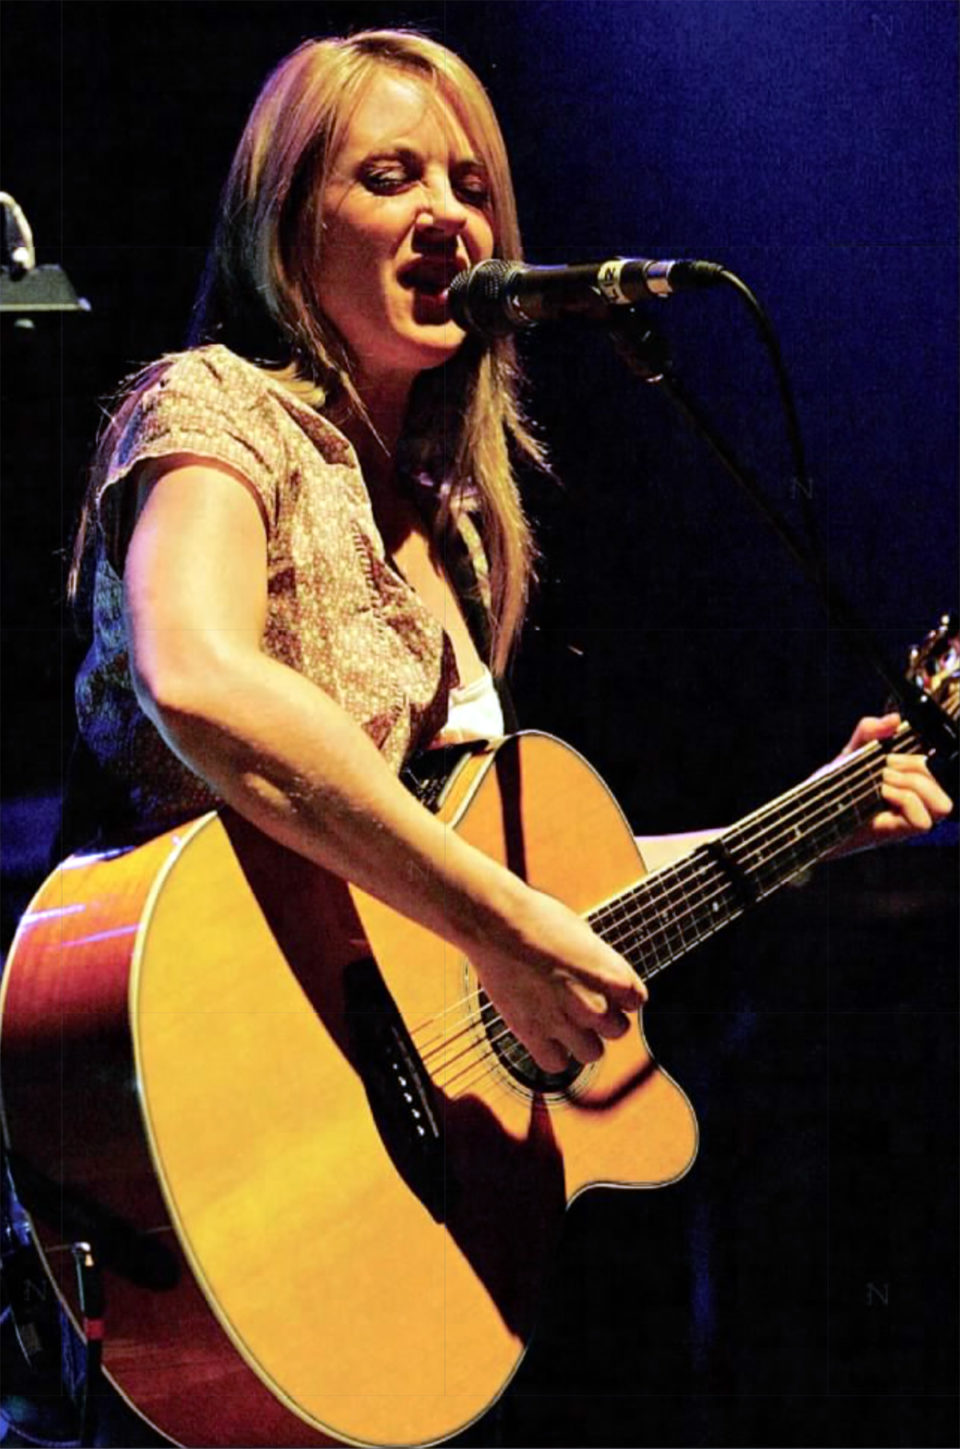 Rocker Liz Phair performs at the Vic Theatre on October 25, 2005. (Photo: Wes Pope/Chicago Tribune/MCT)